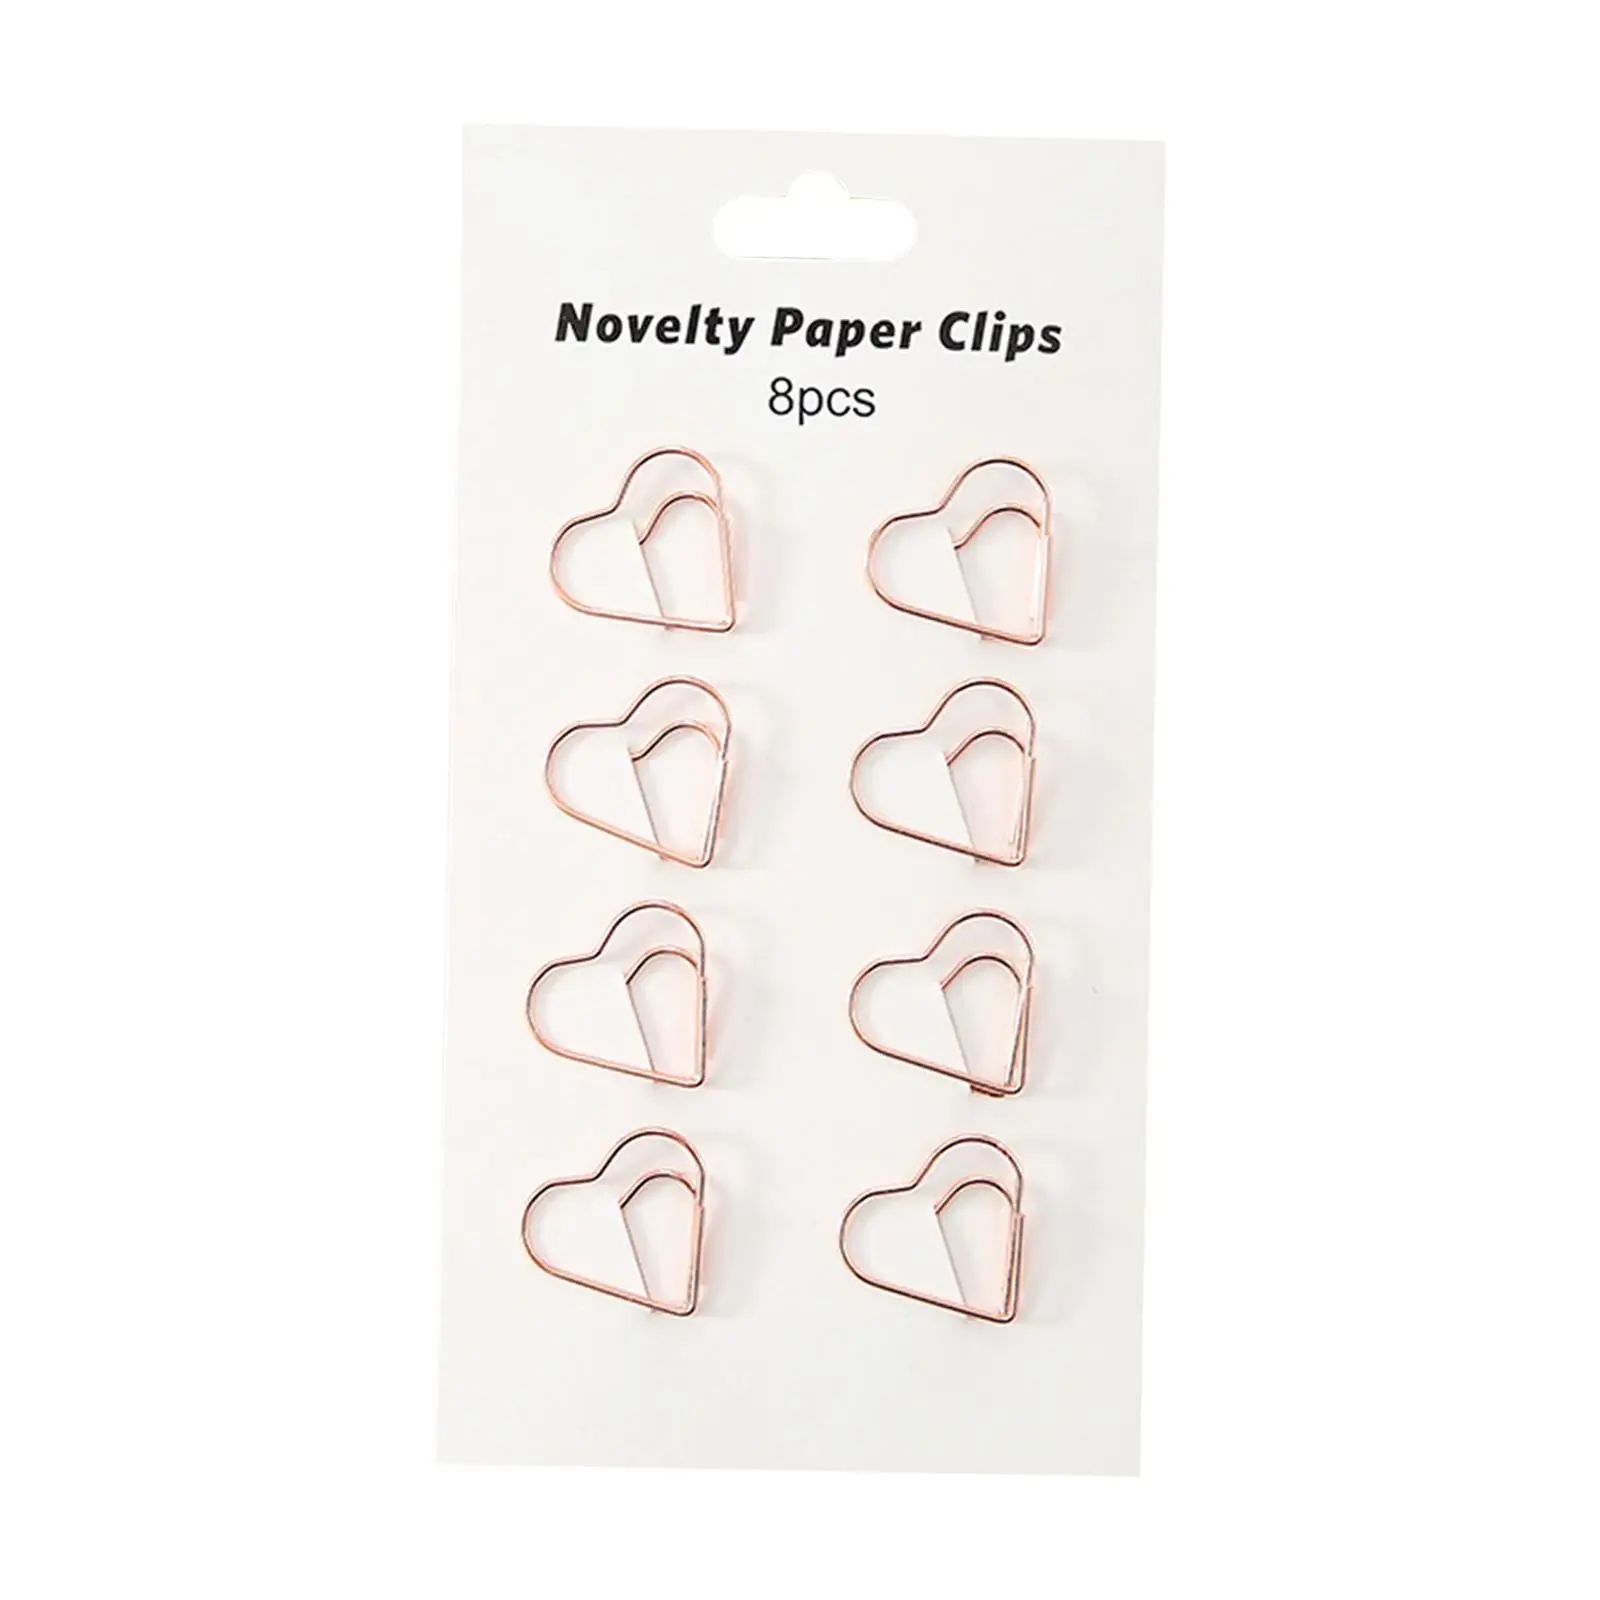 8Pcs Novelty Paper Clips Bookmark Reusable Wire Stationery Accessories for Invitation Card Document Organization School Student